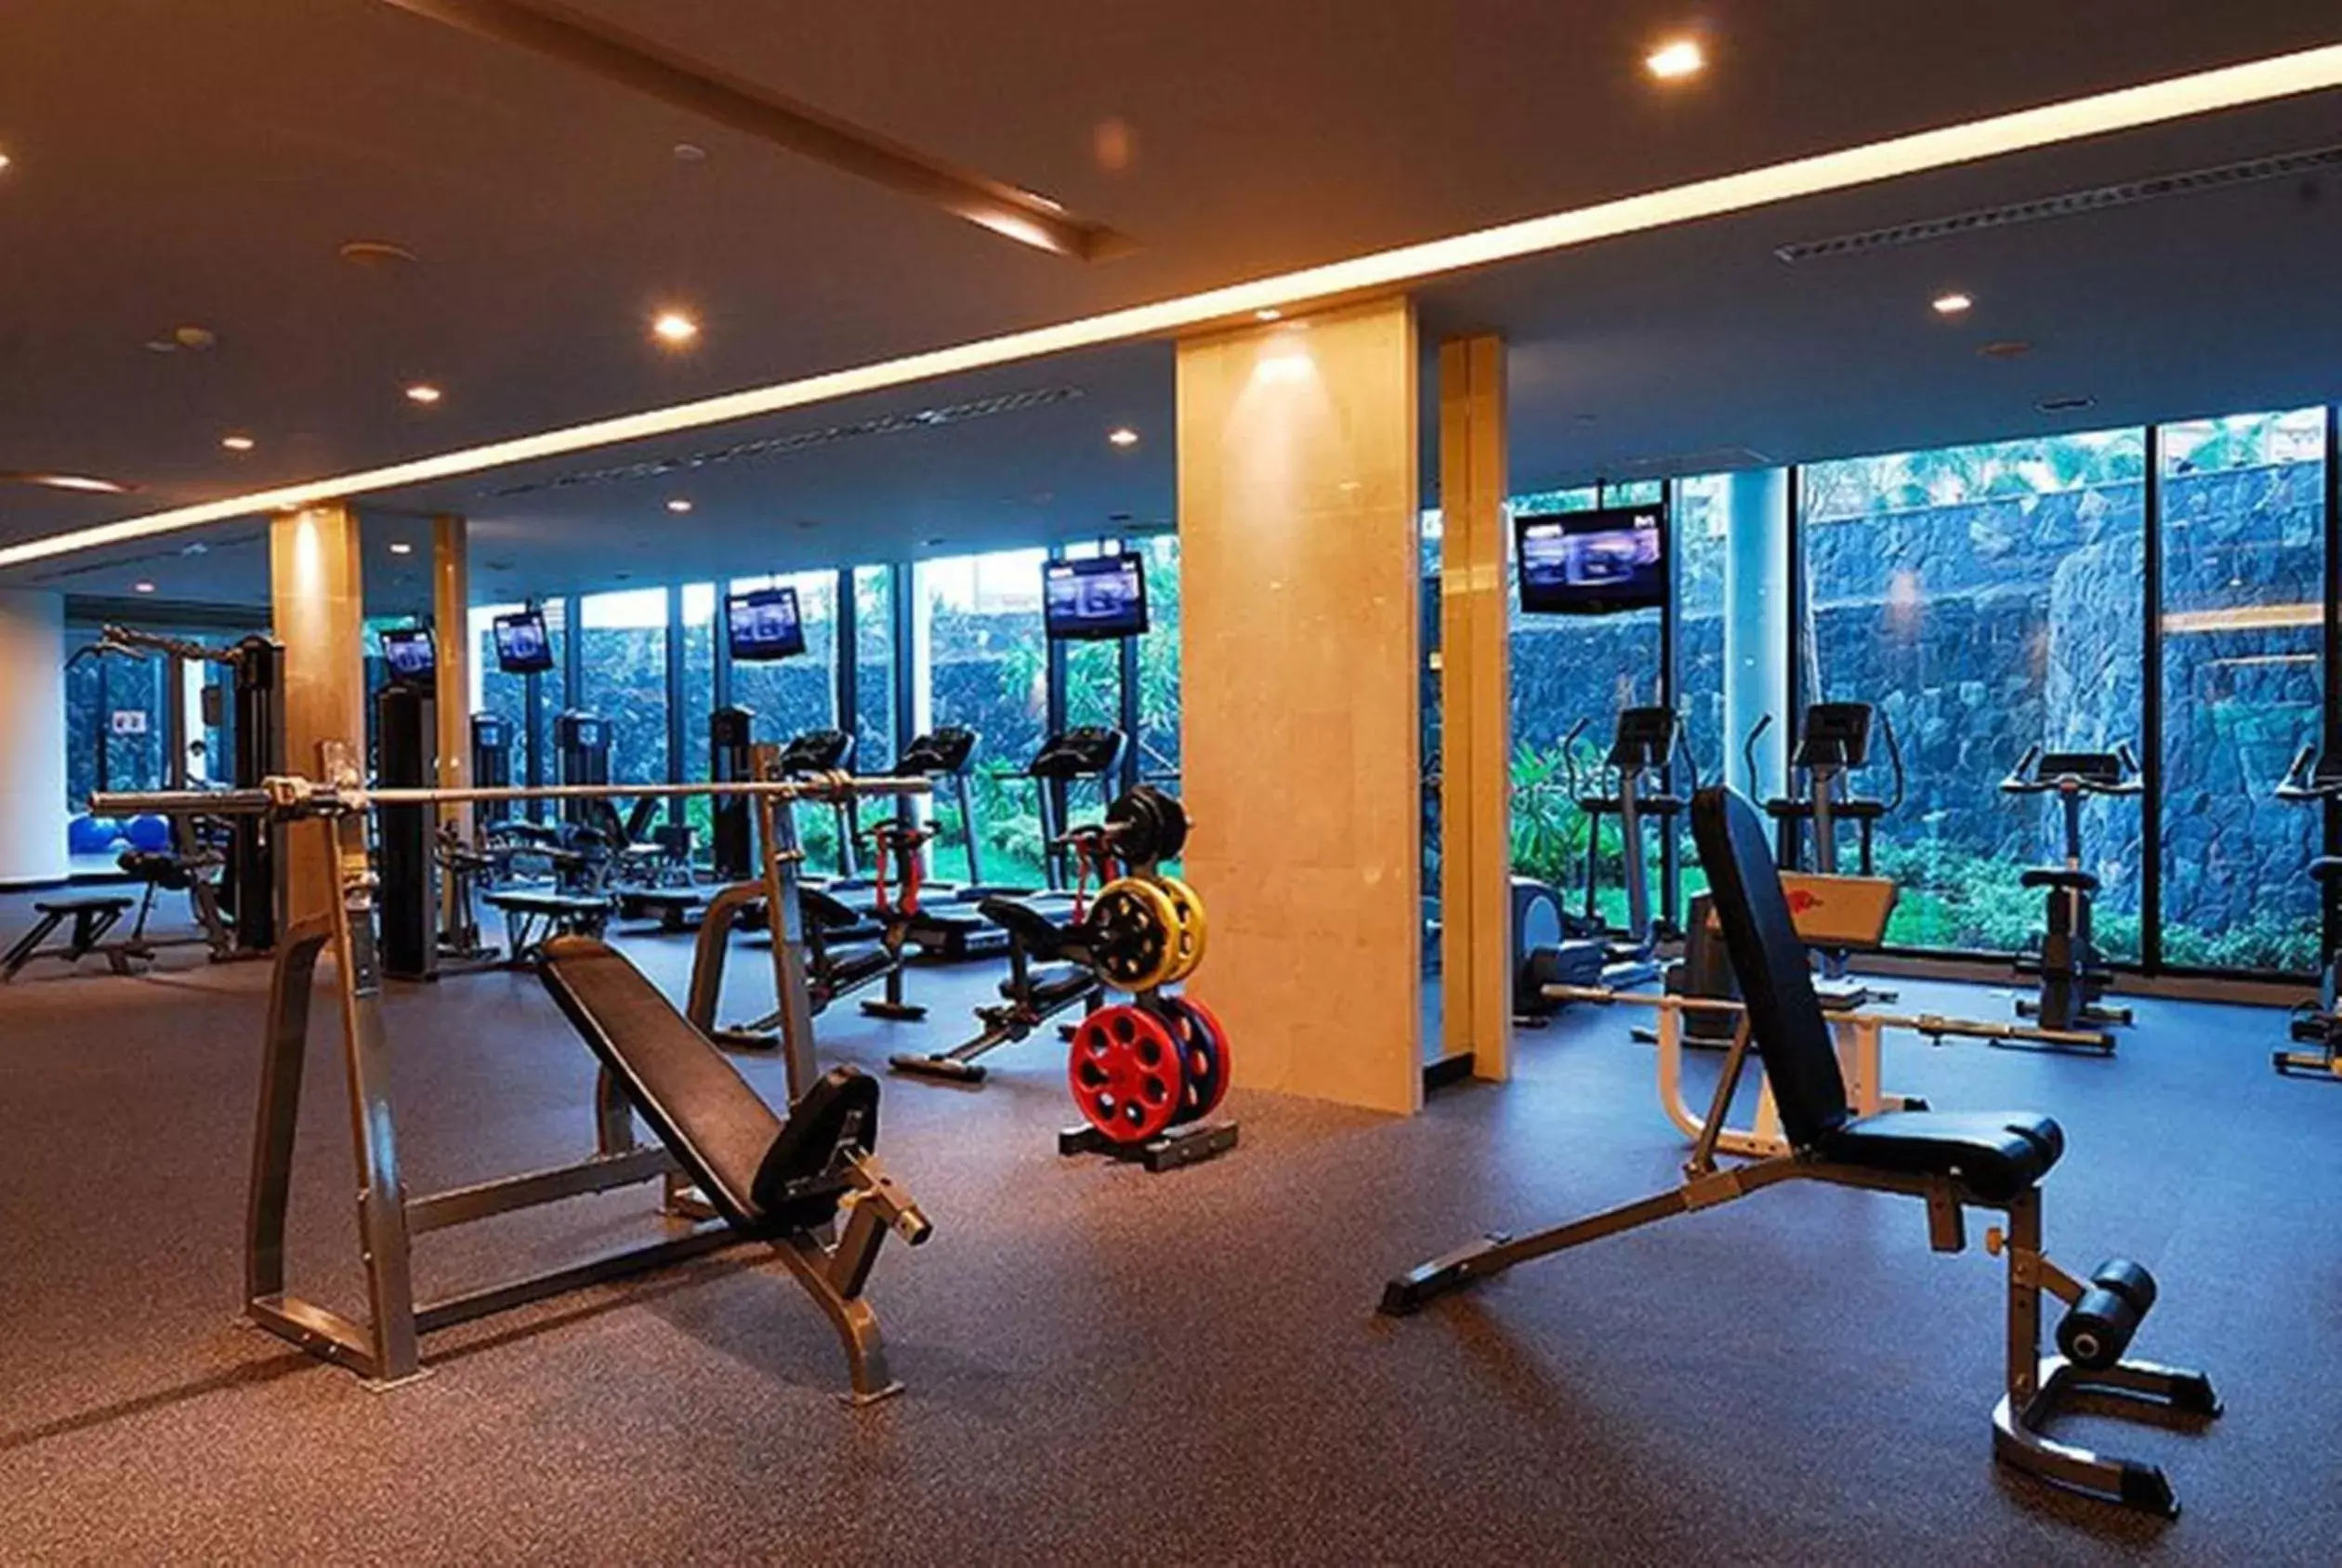 Fitness centre/facilities, Fitness Center/Facilities in The Zign Hotel